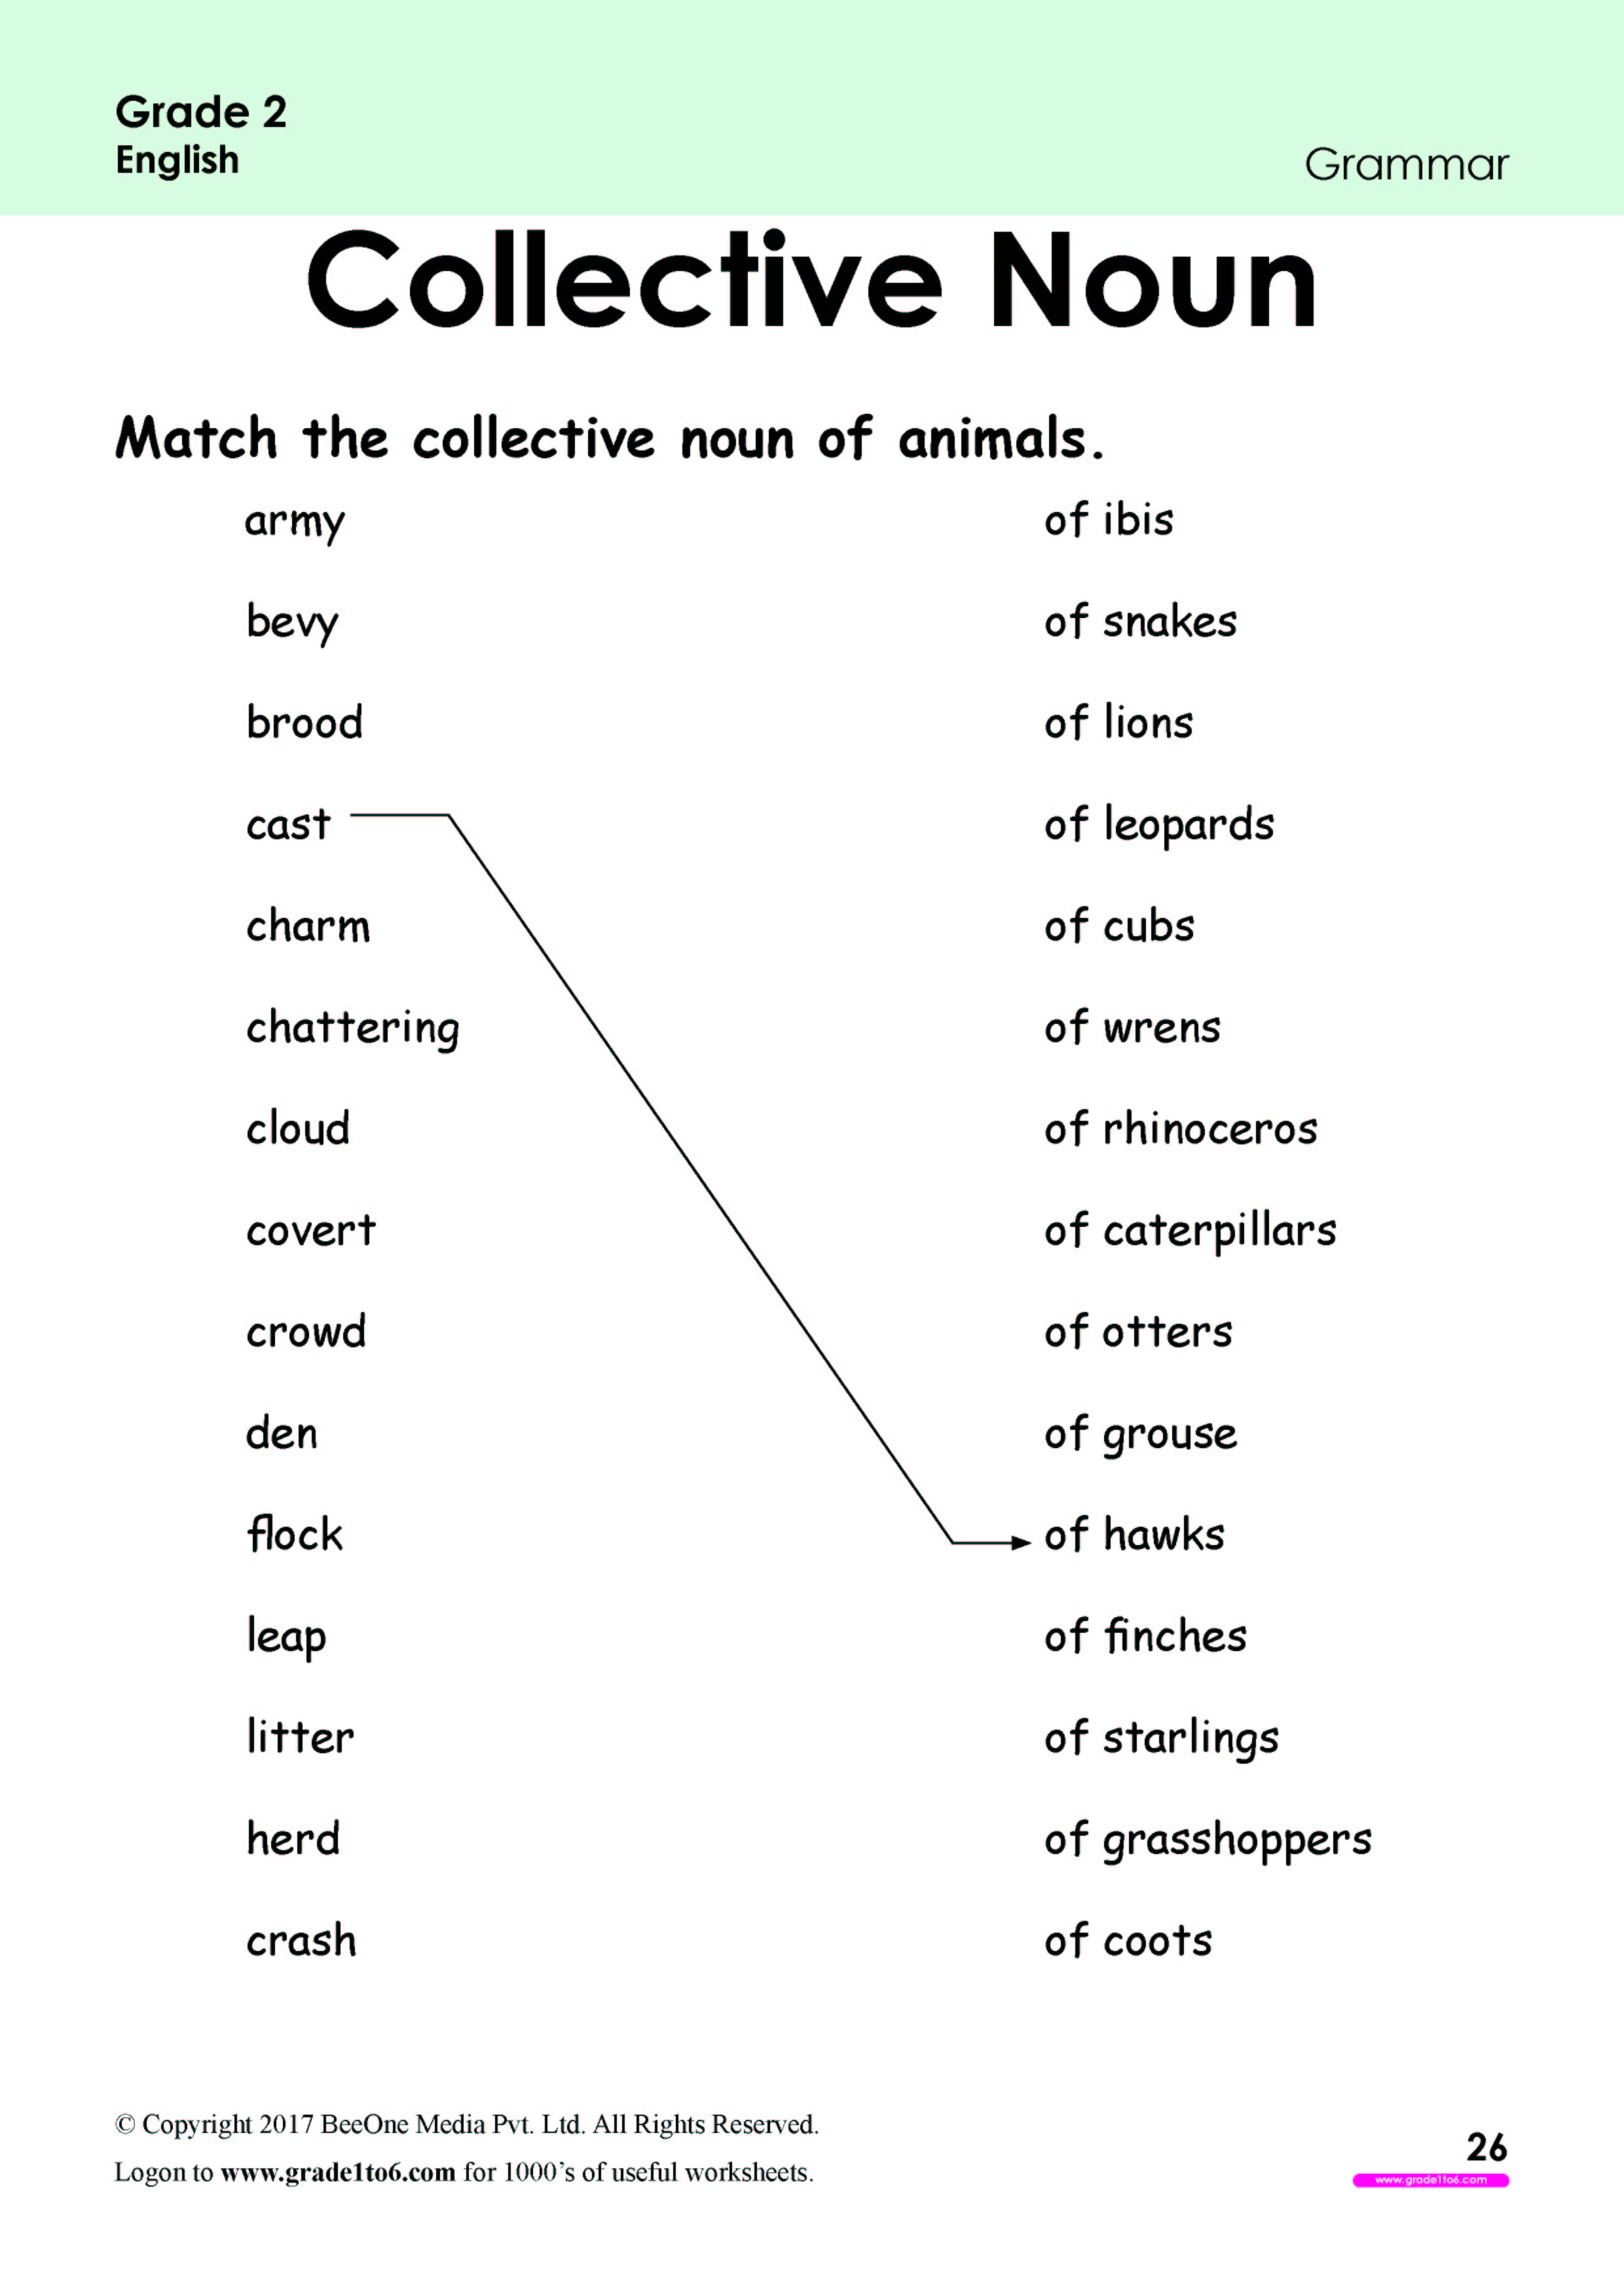 Functions Of Nouns Worksheets For Grade 6 With Answers